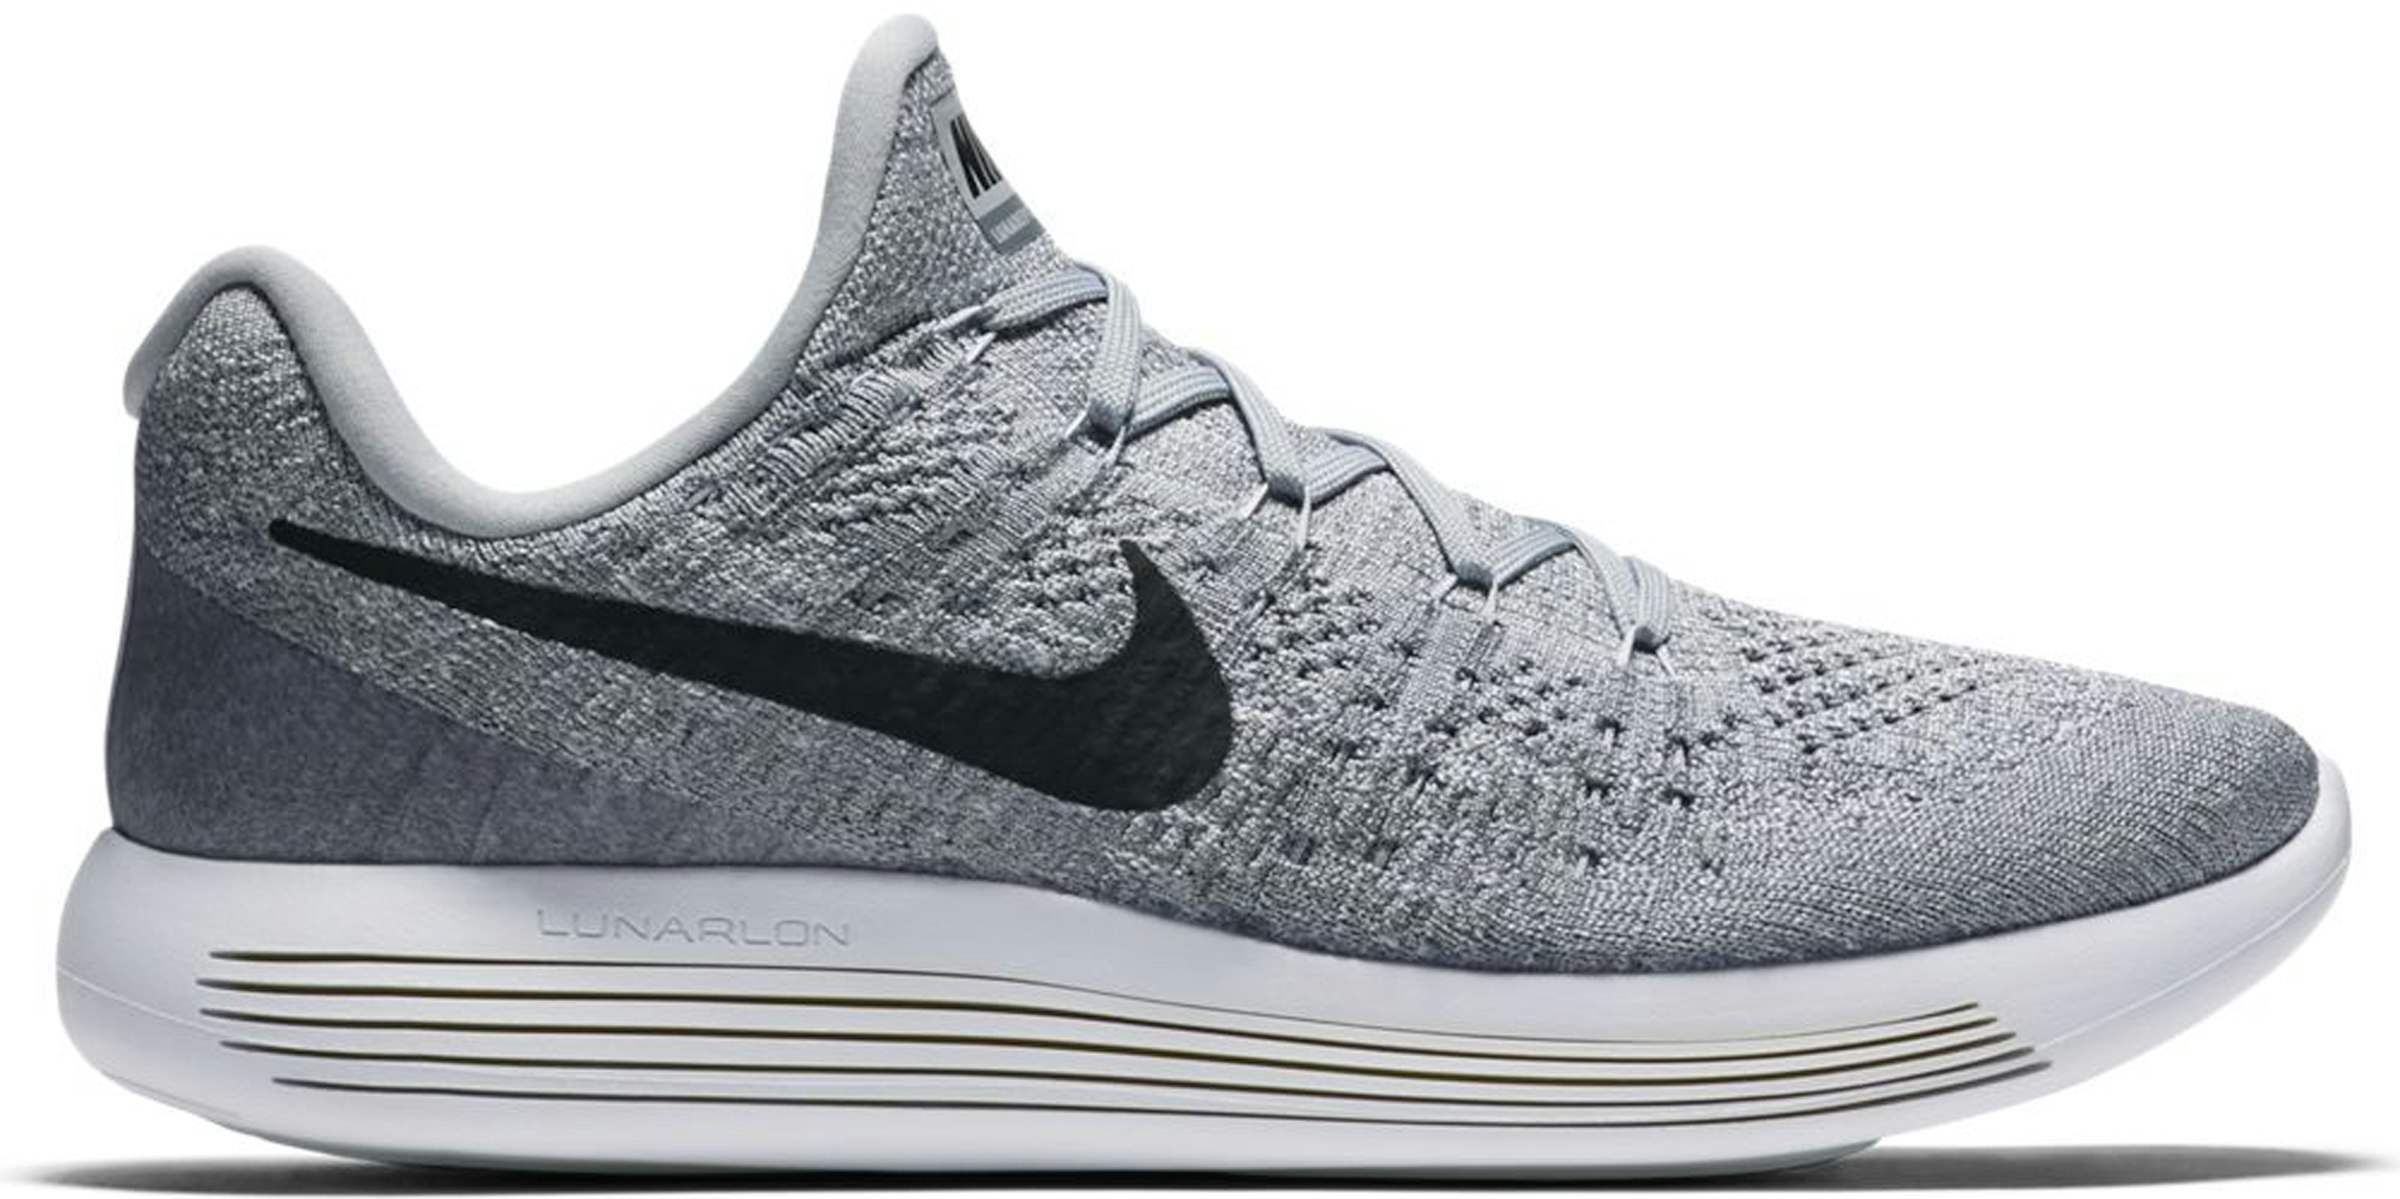 Comienzo Complacer obra maestra Nike Lunarepic Low Flyknit 2 Wolf Grey Hombre - 863779-002 - MX